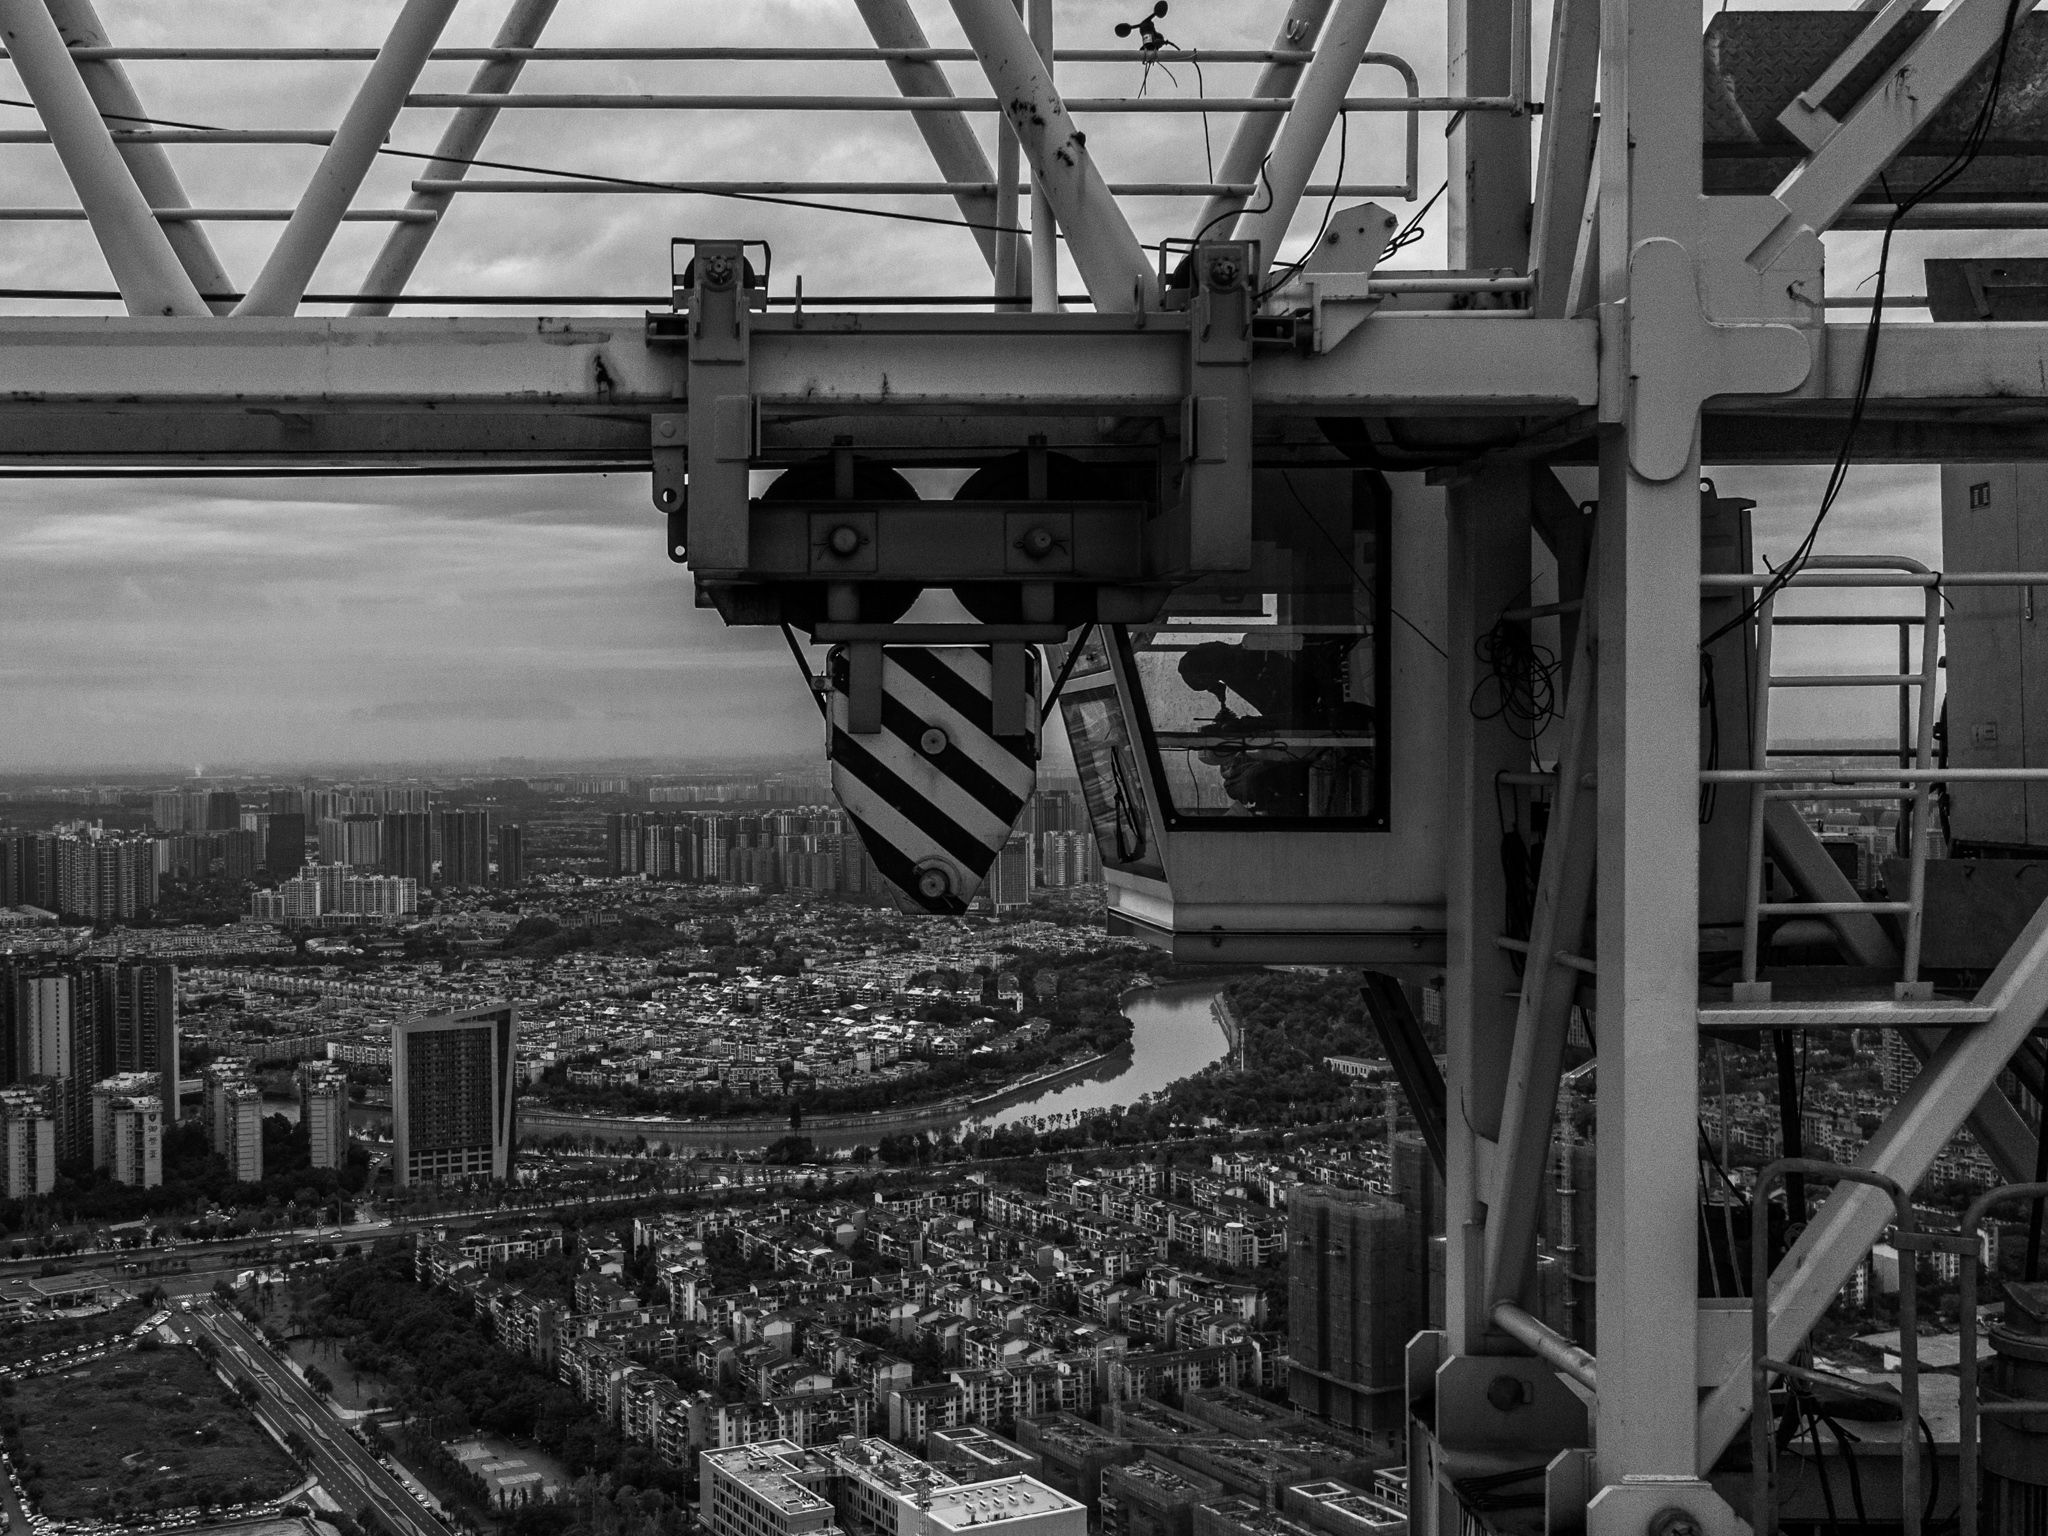 construction crane, city, megalopolis, black and white, tall buildings, river, bird's eye view, aerial view, Druz Denys